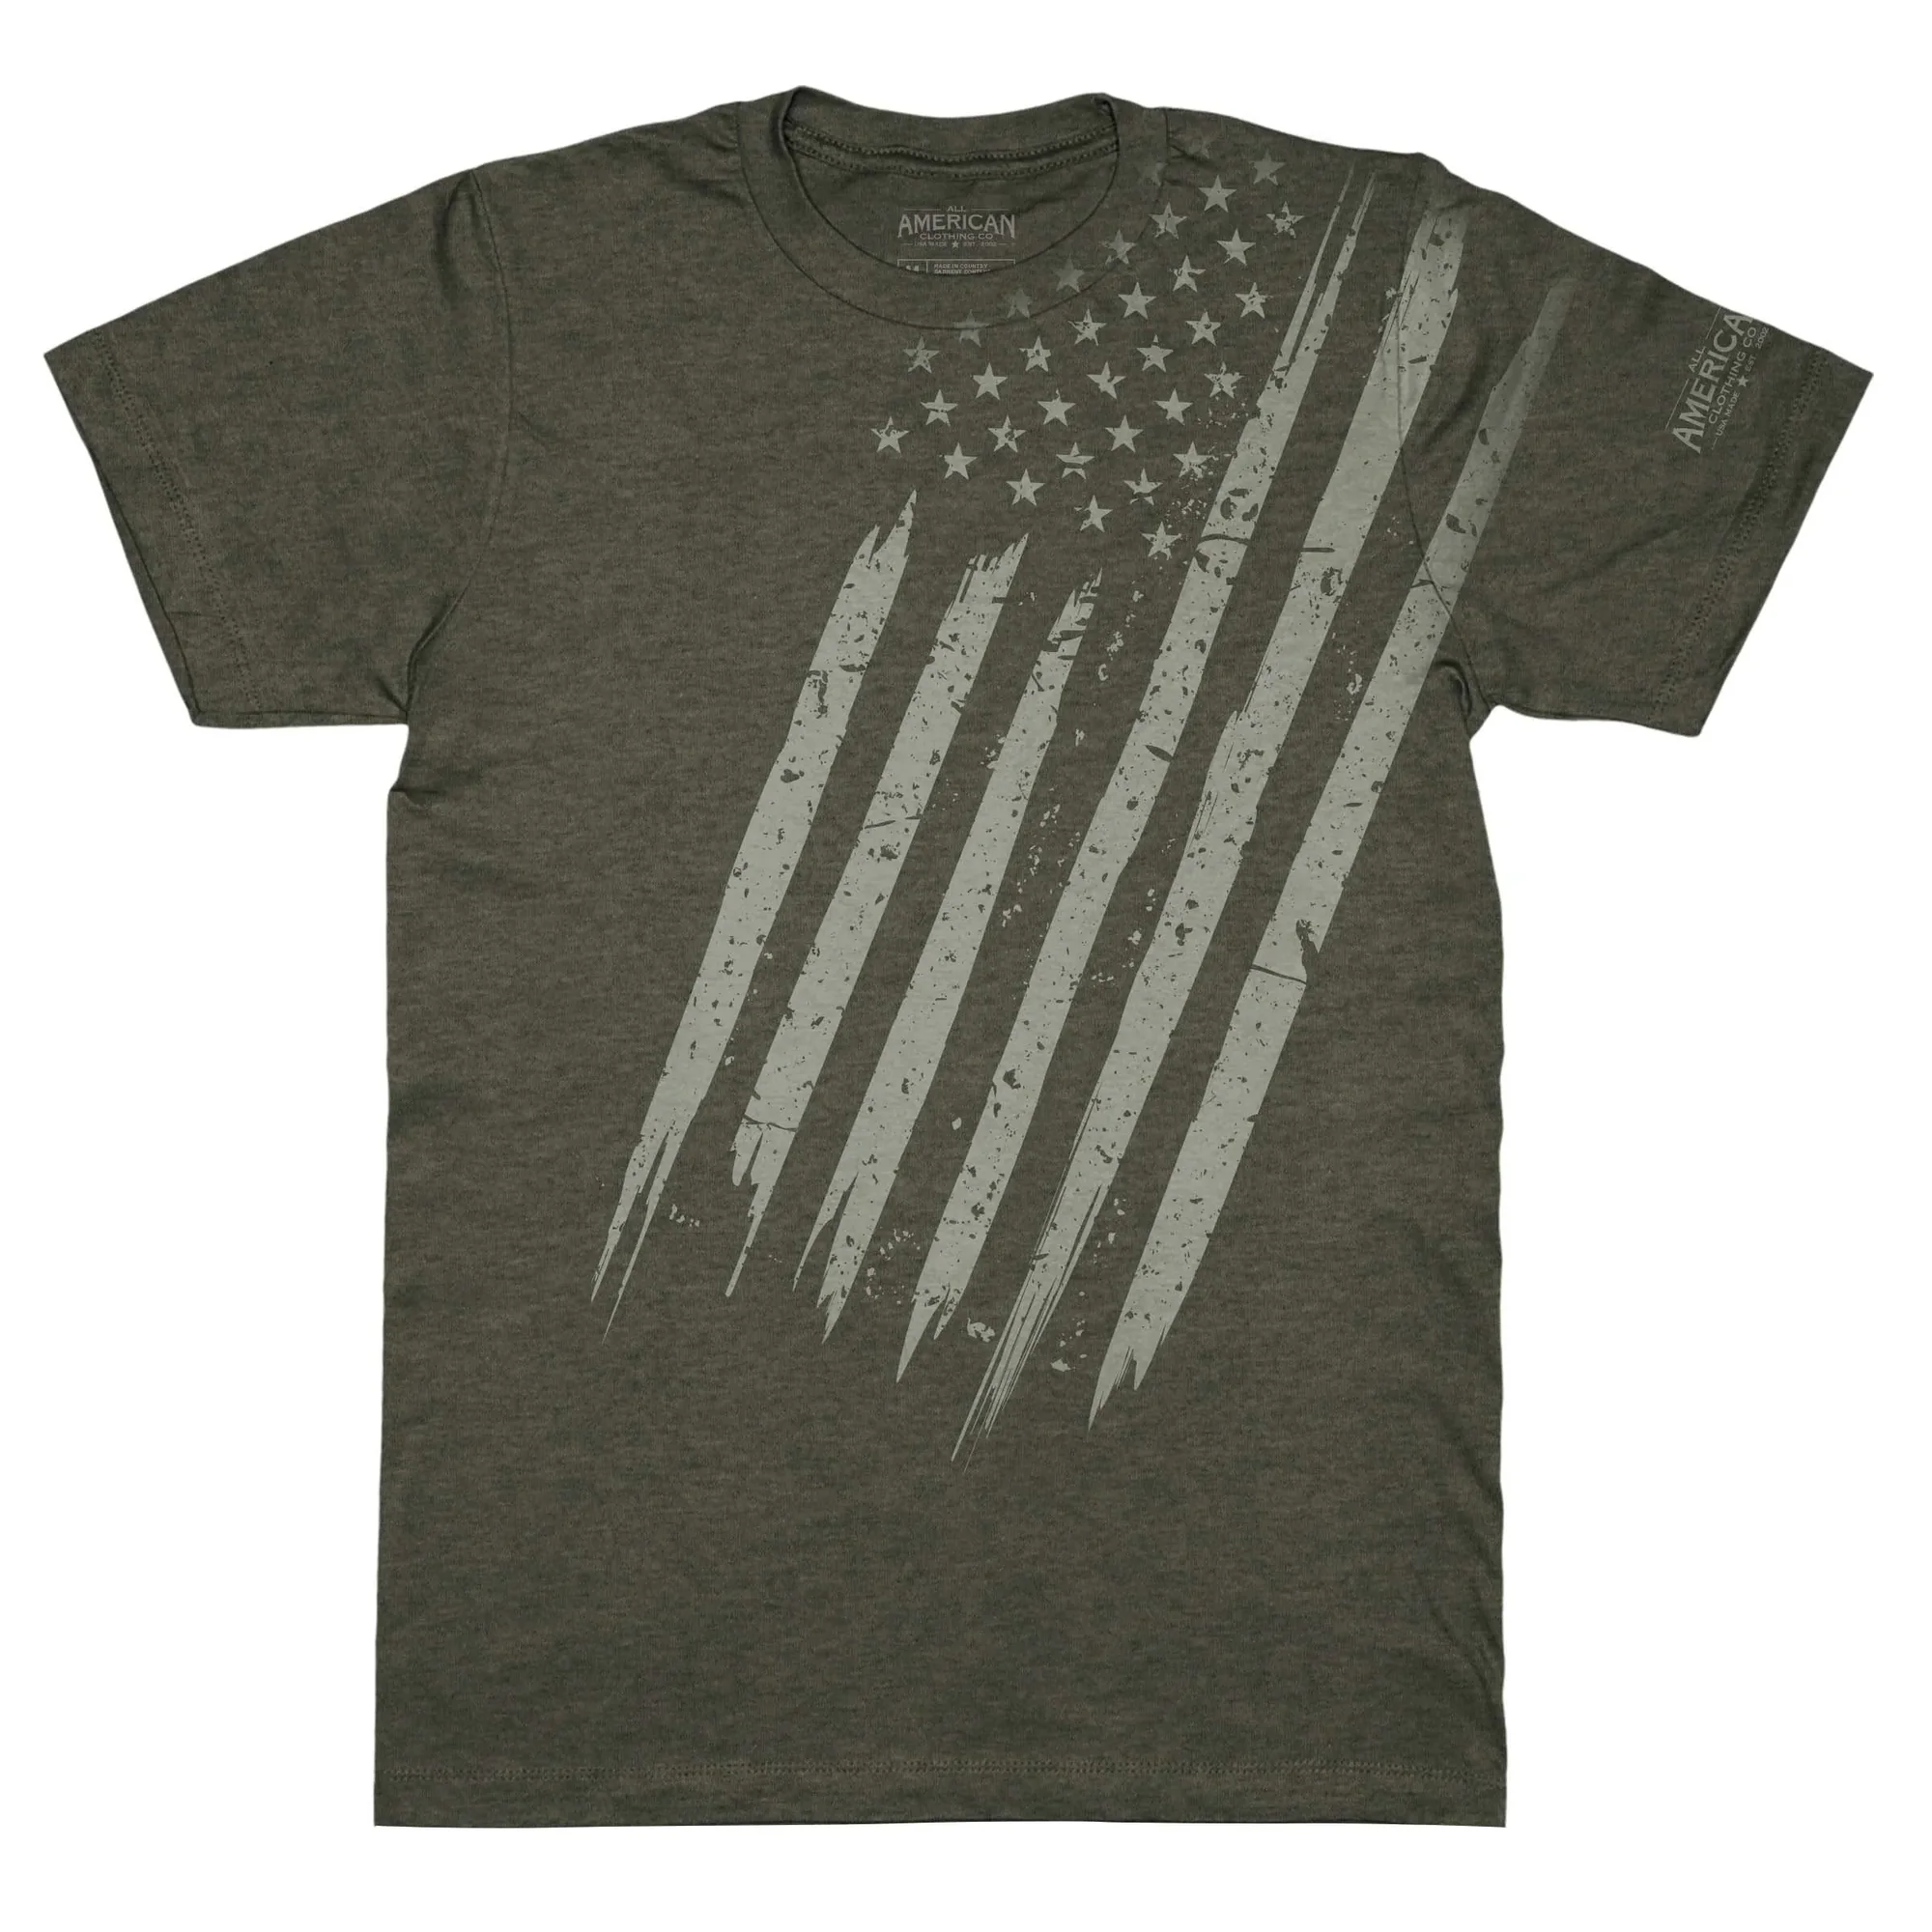 All American Clothing Co. Men's Distressed Shoulder Flag T-Shirt posted by ProdOrigin USA in Men's Apparel